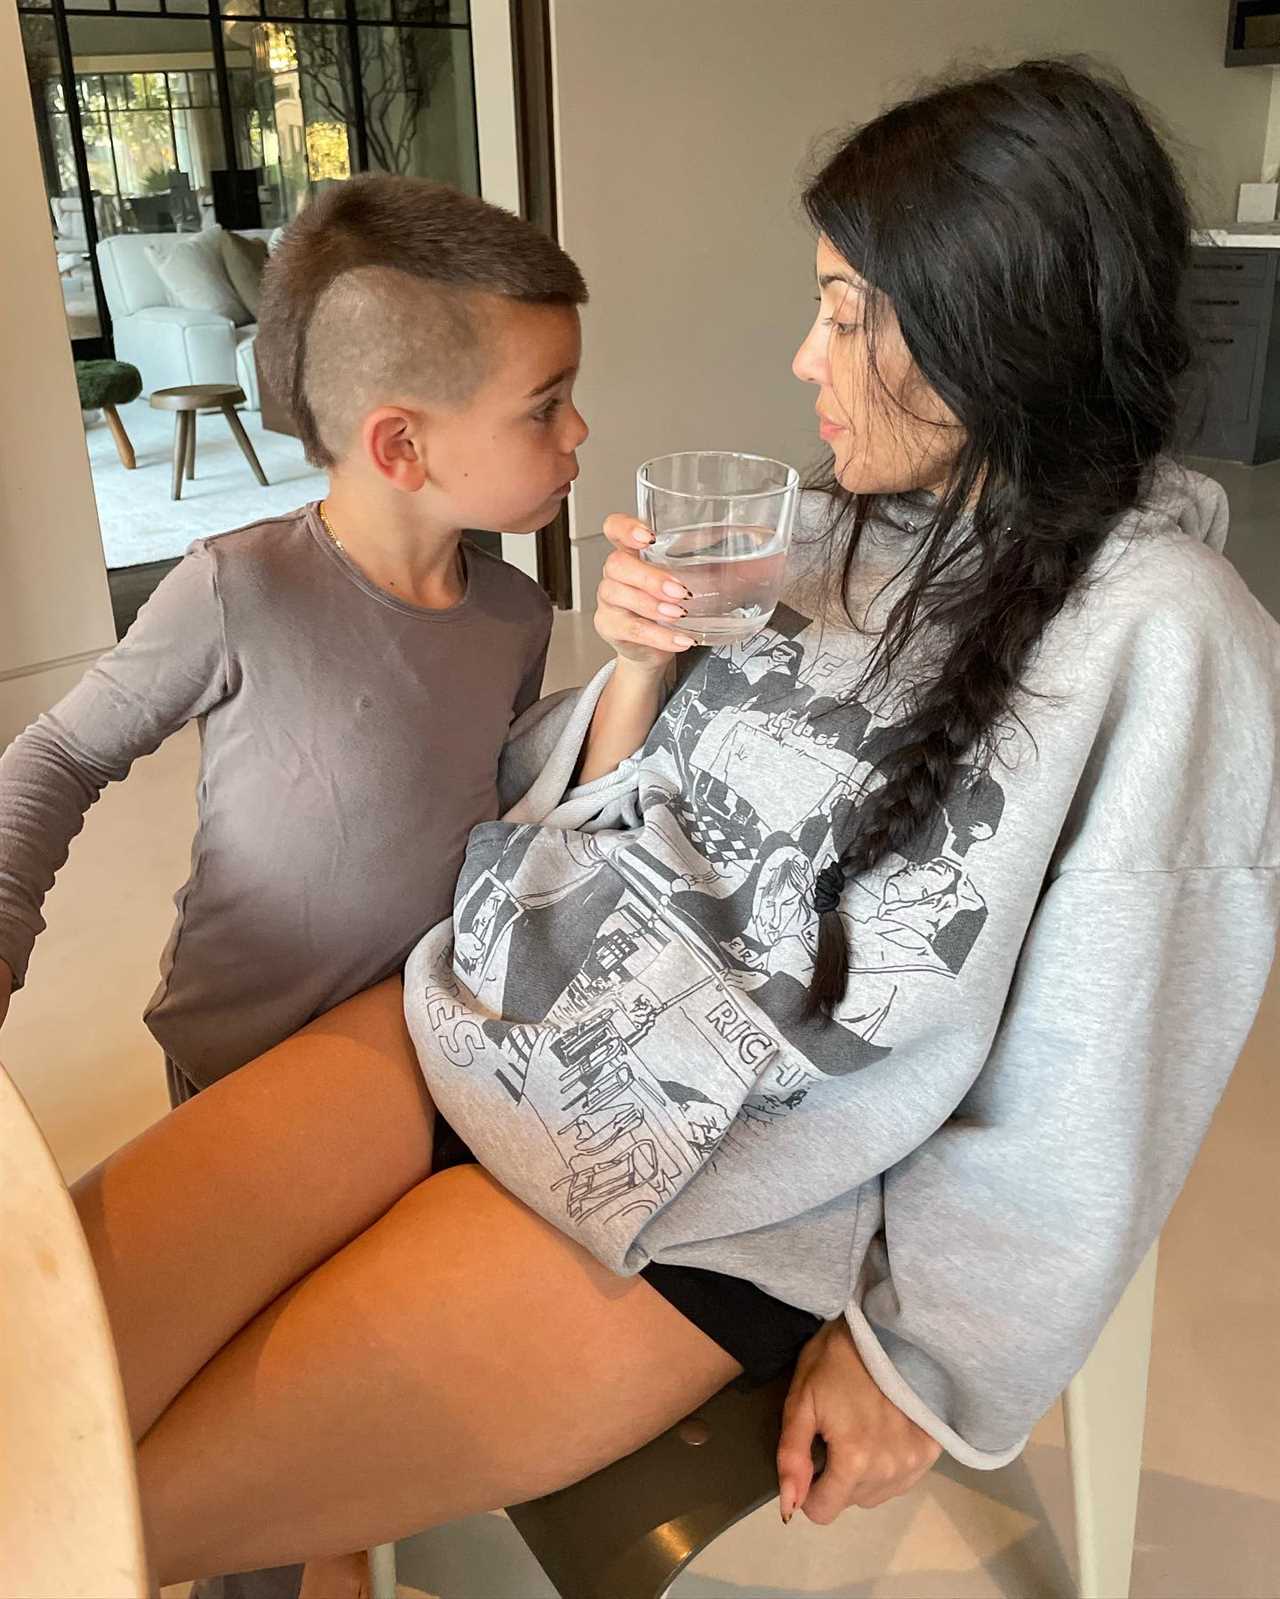 Kourtney Kardashian slammed for ‘deplorable’ treatment of son Reign, 8, in new pics after revealing his hair makeover